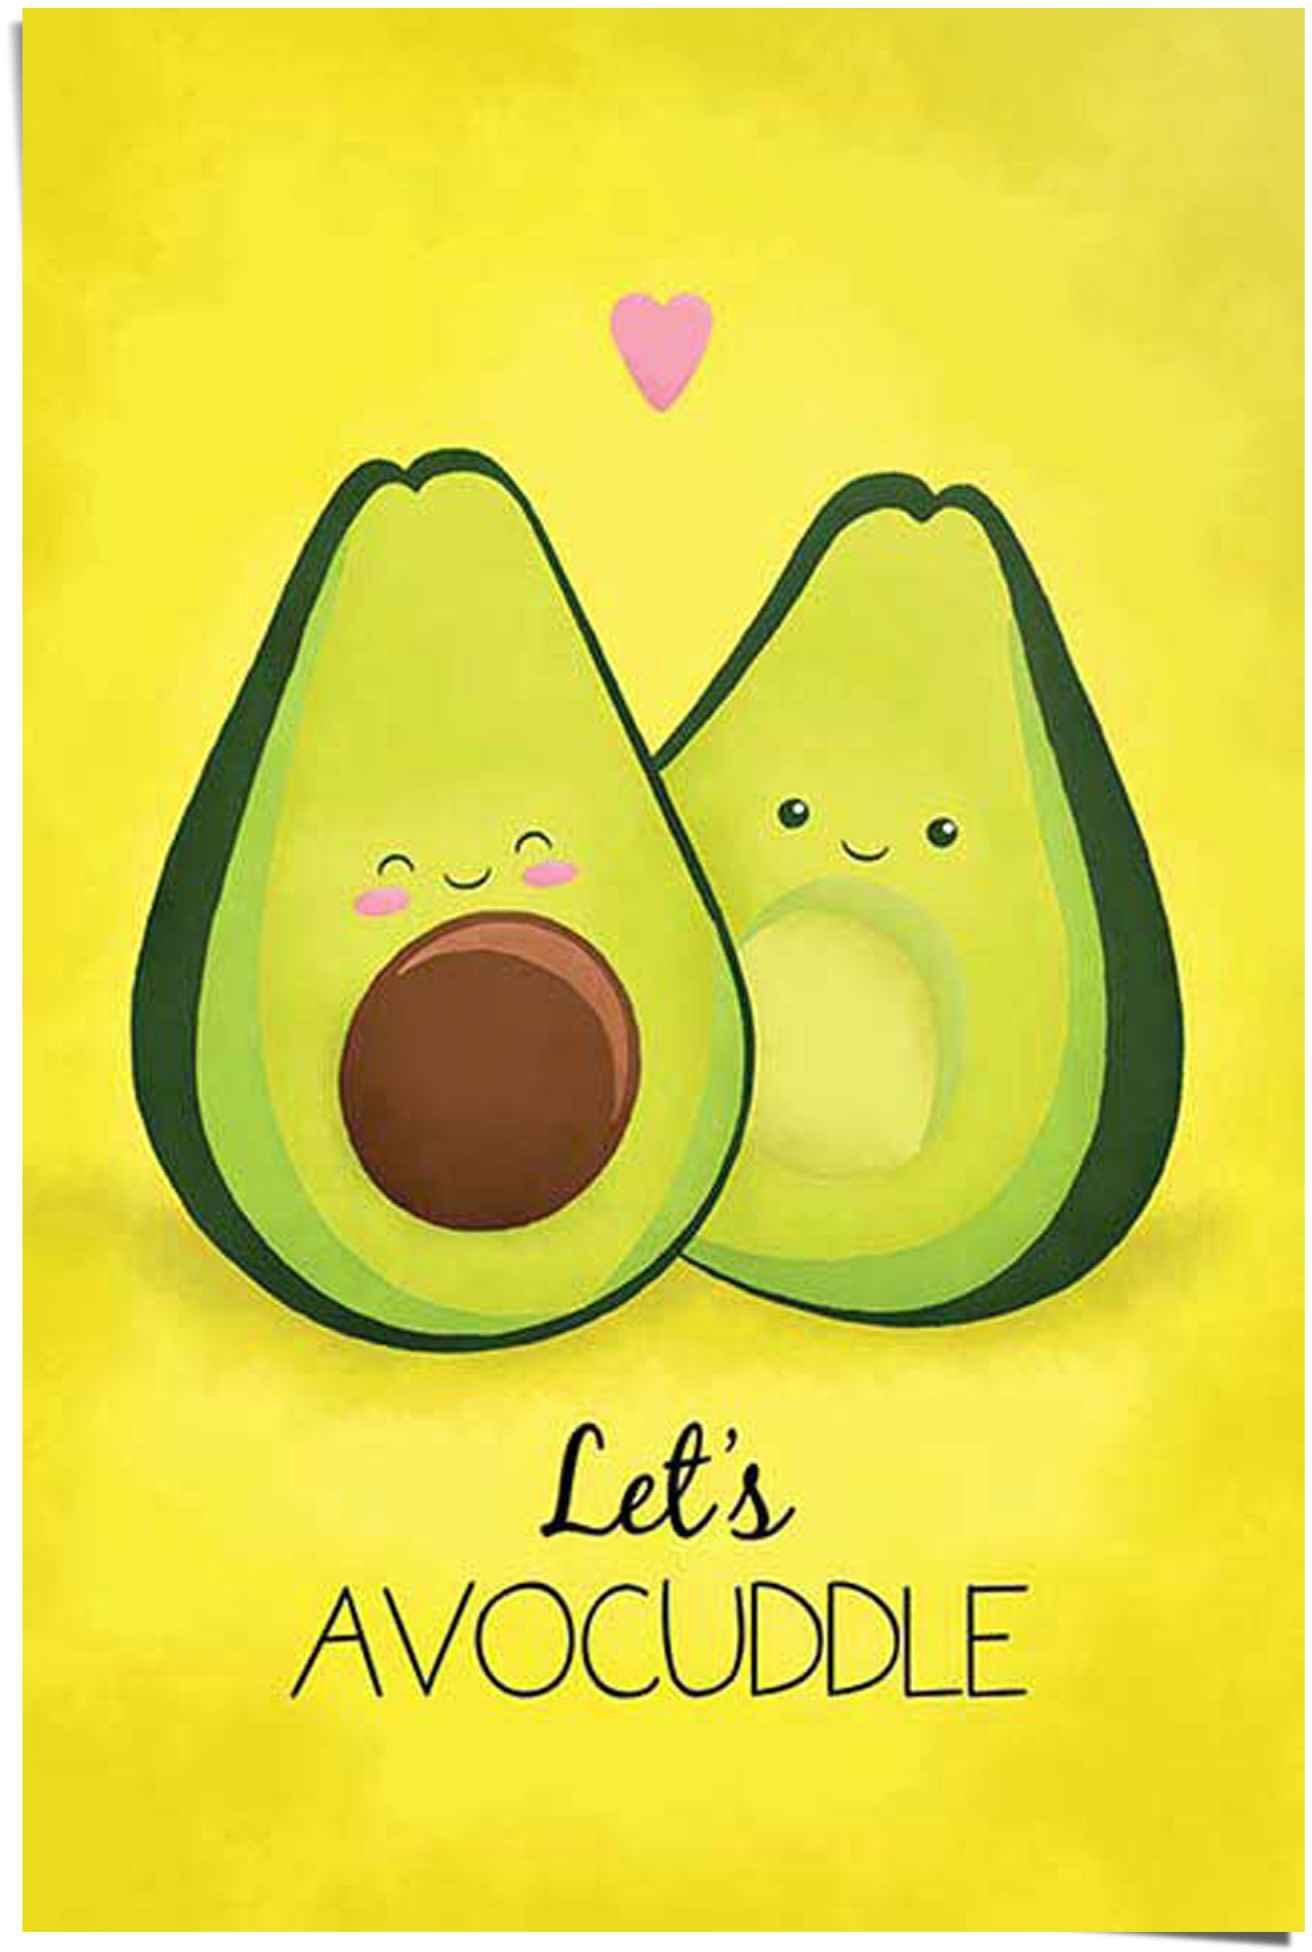 Avocado avocuddle, Poster (1 St) Reinders! let´s